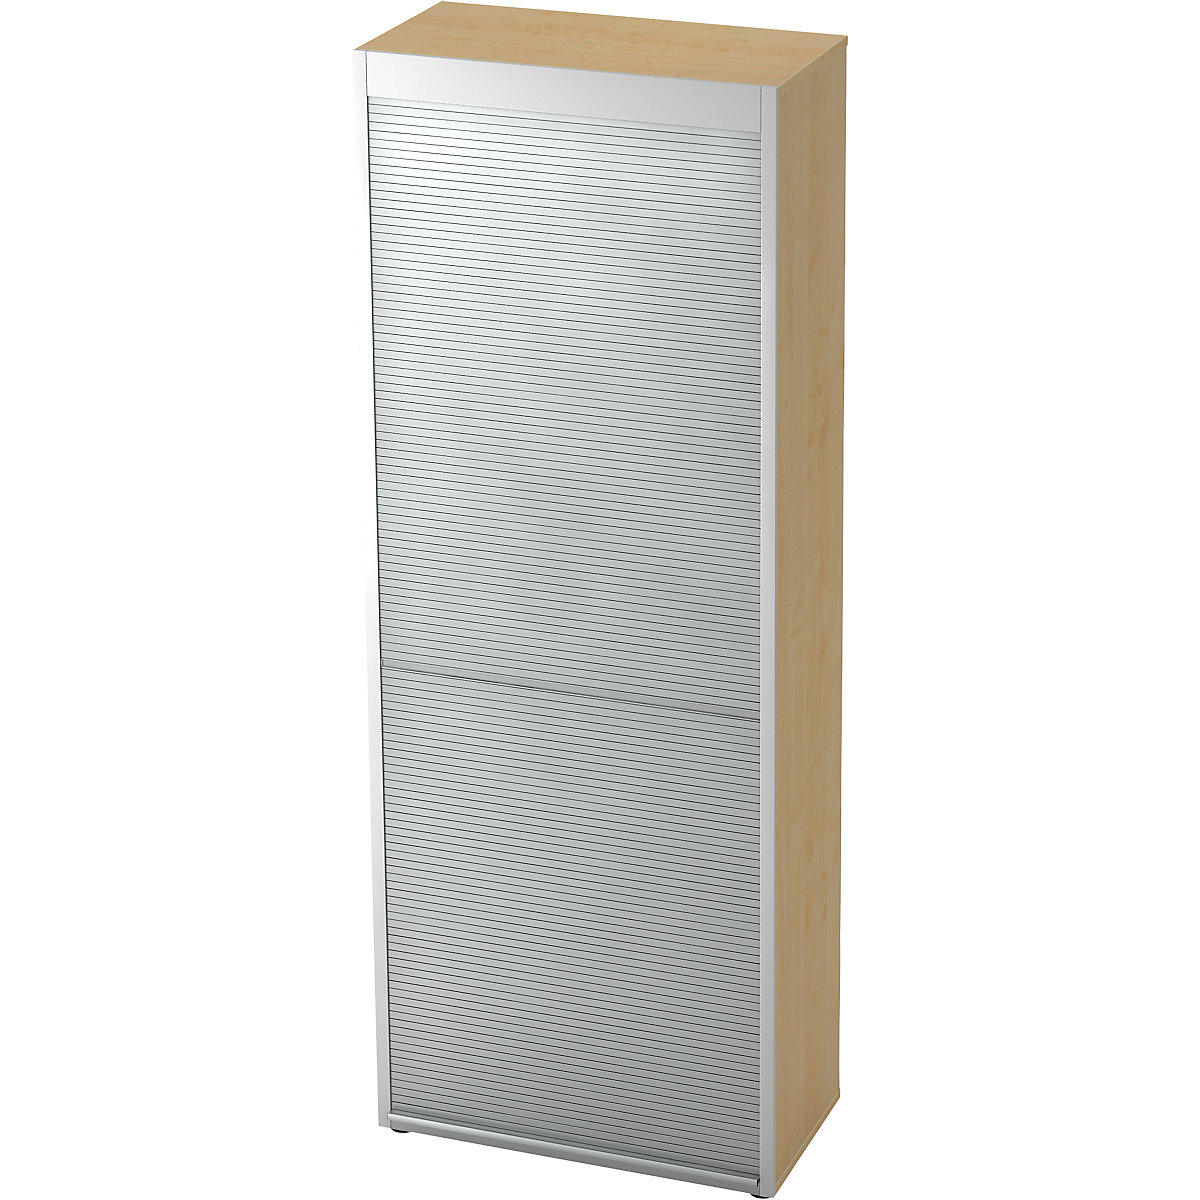 Roller shutter cupboard with acoustic rear panel ANNY-AC